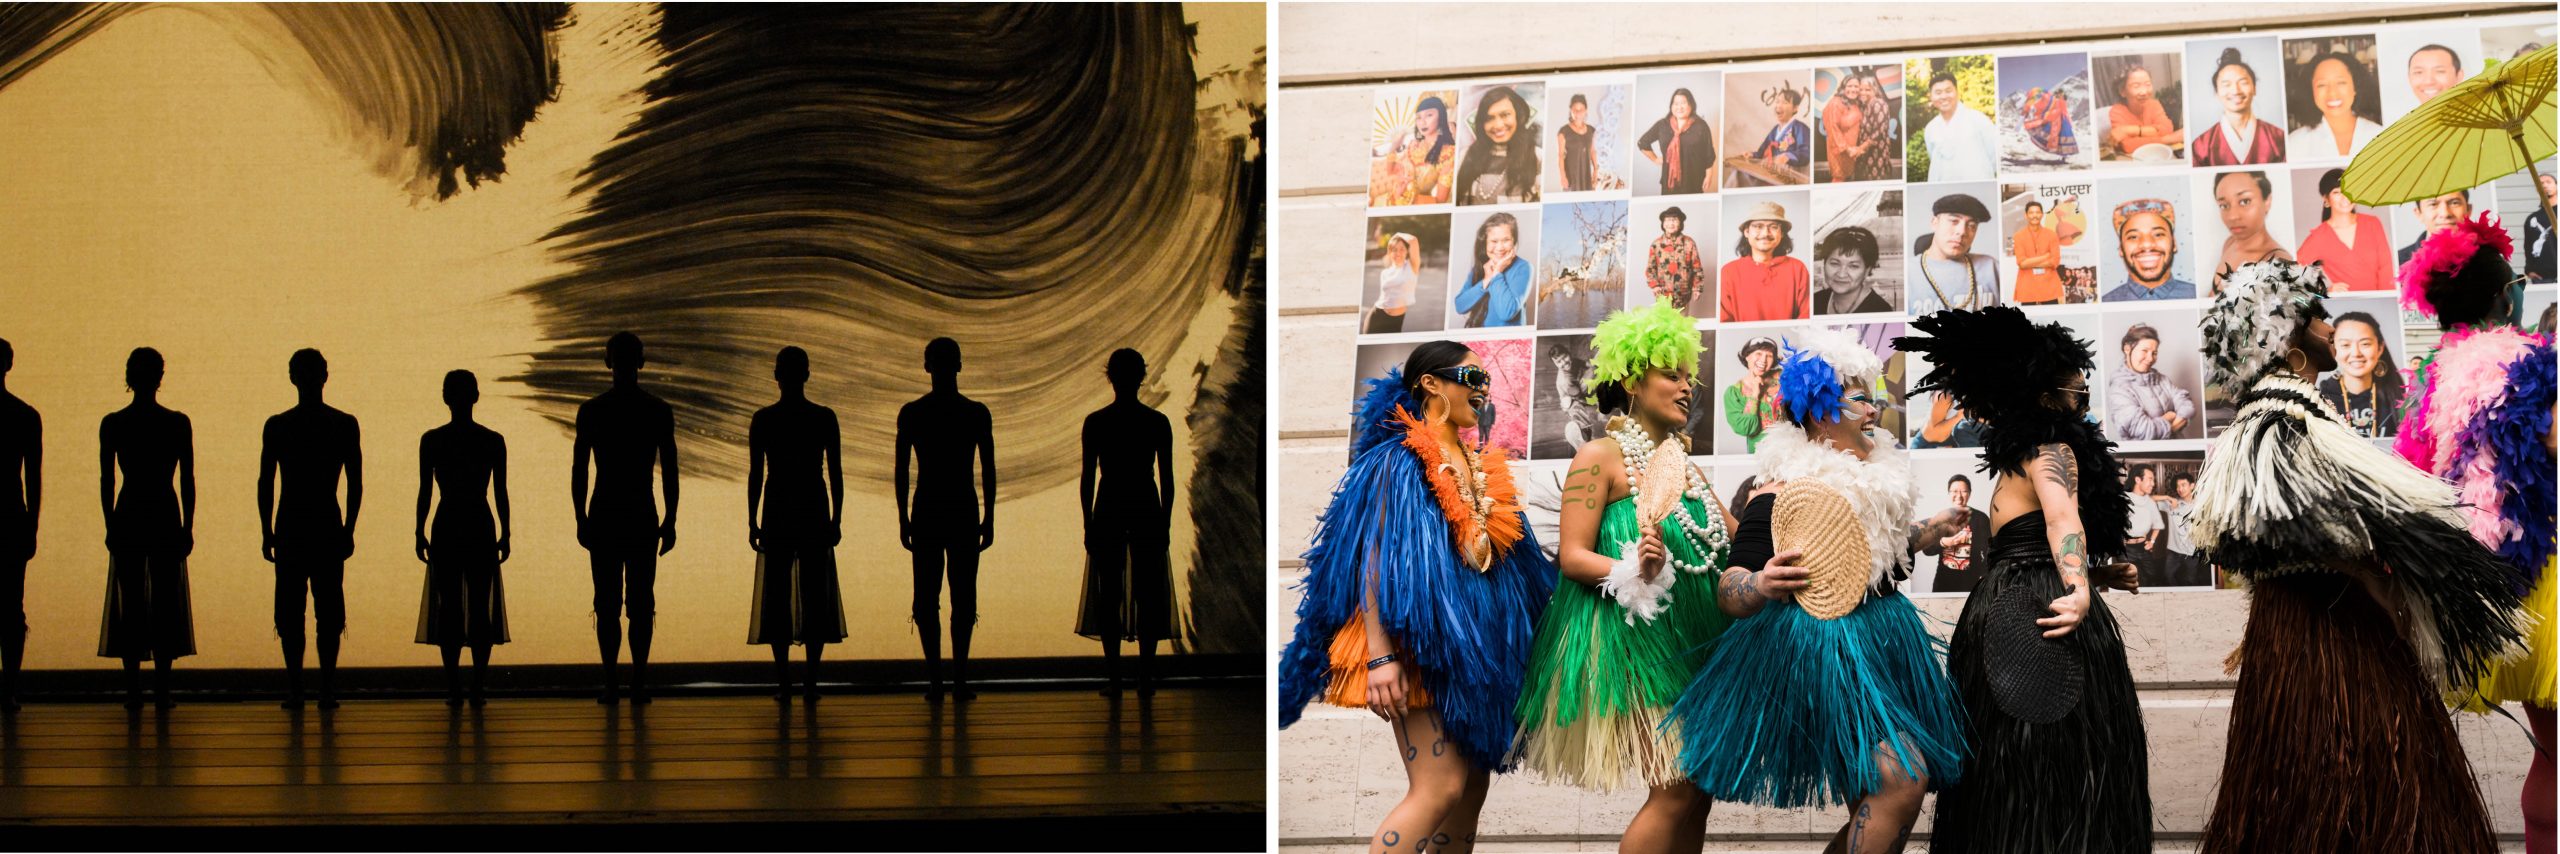 Photo on left is eight dancers stand side-by-side on stage with large brush-stroke like design in the background. Photo on the right is Multiple performers wearing feathered headpieces and colorful skirts interacting in front of a wall of portraits.